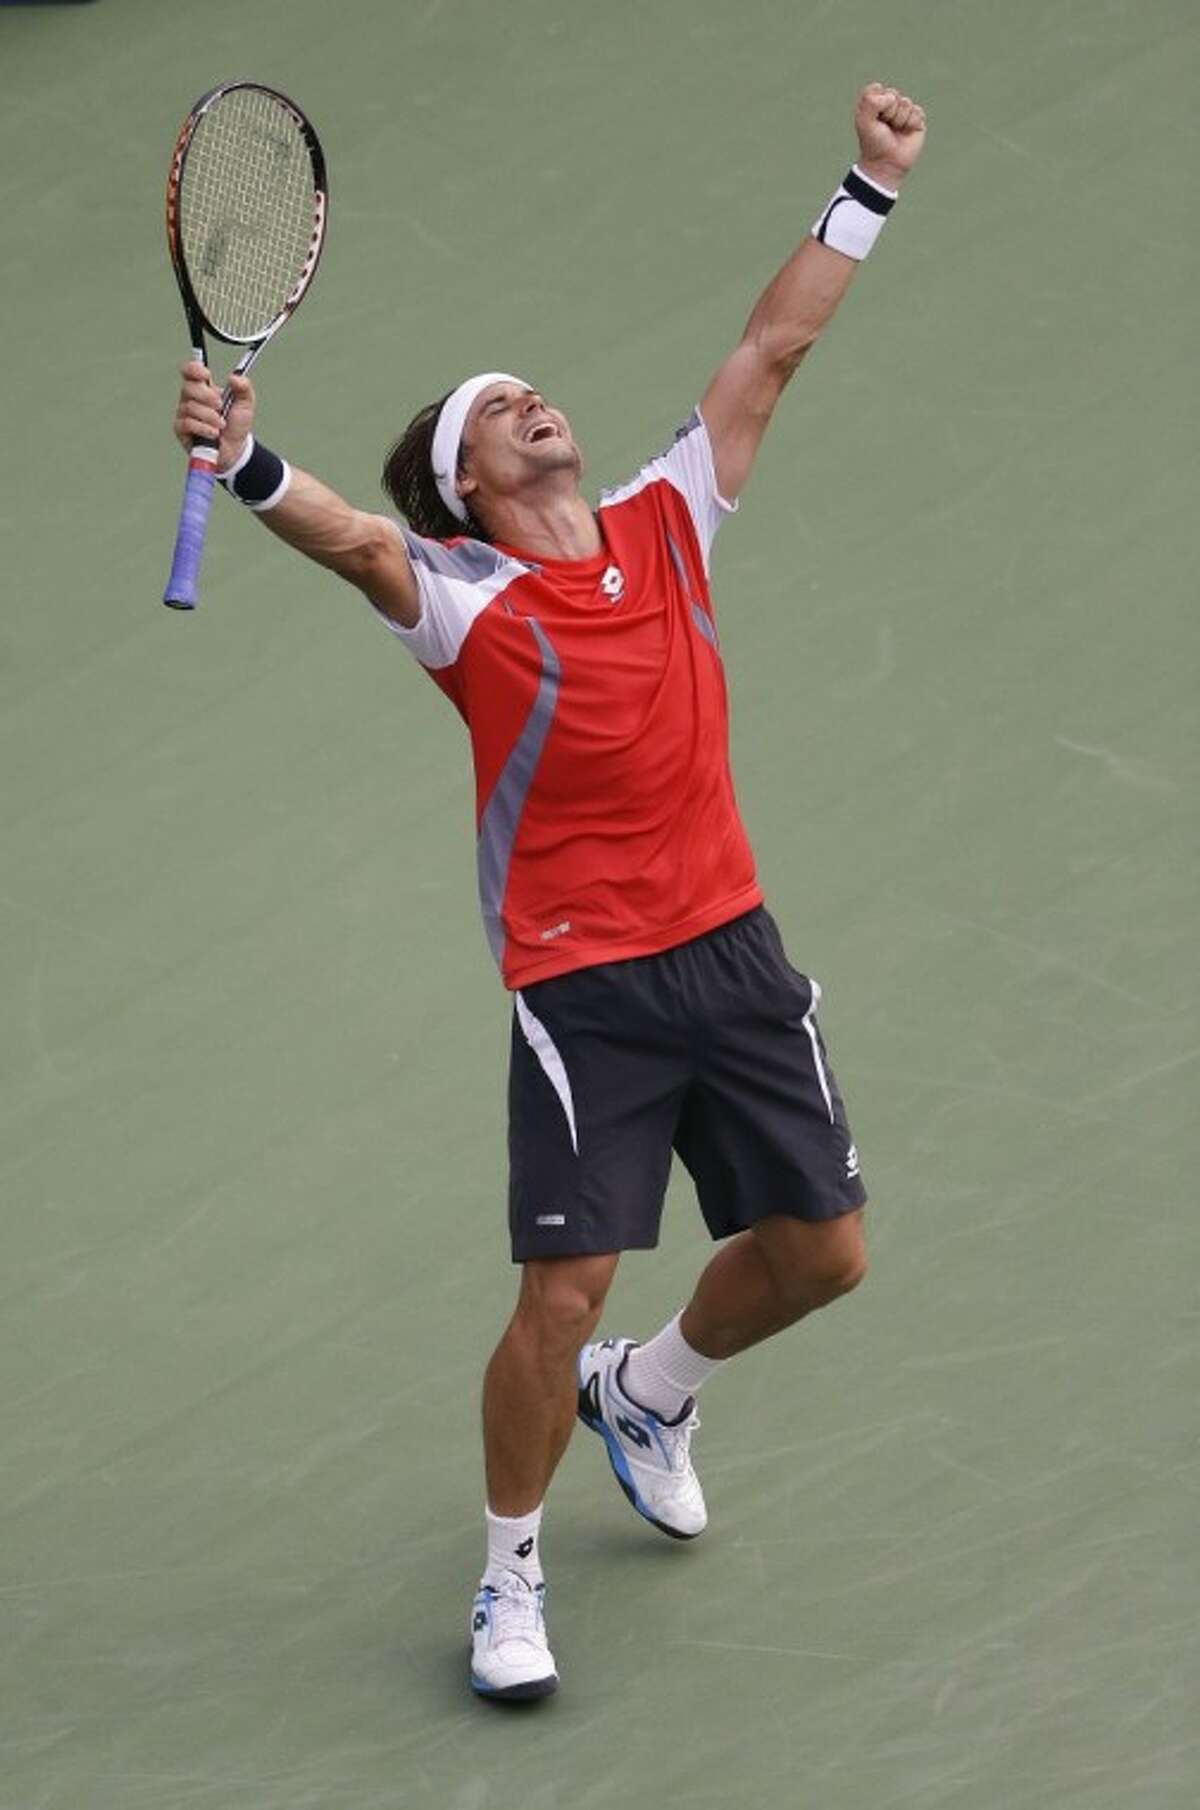 David Ferrer of Spain reacts after defeating Janko Tipsarevic in five sets in the U.S. Open.